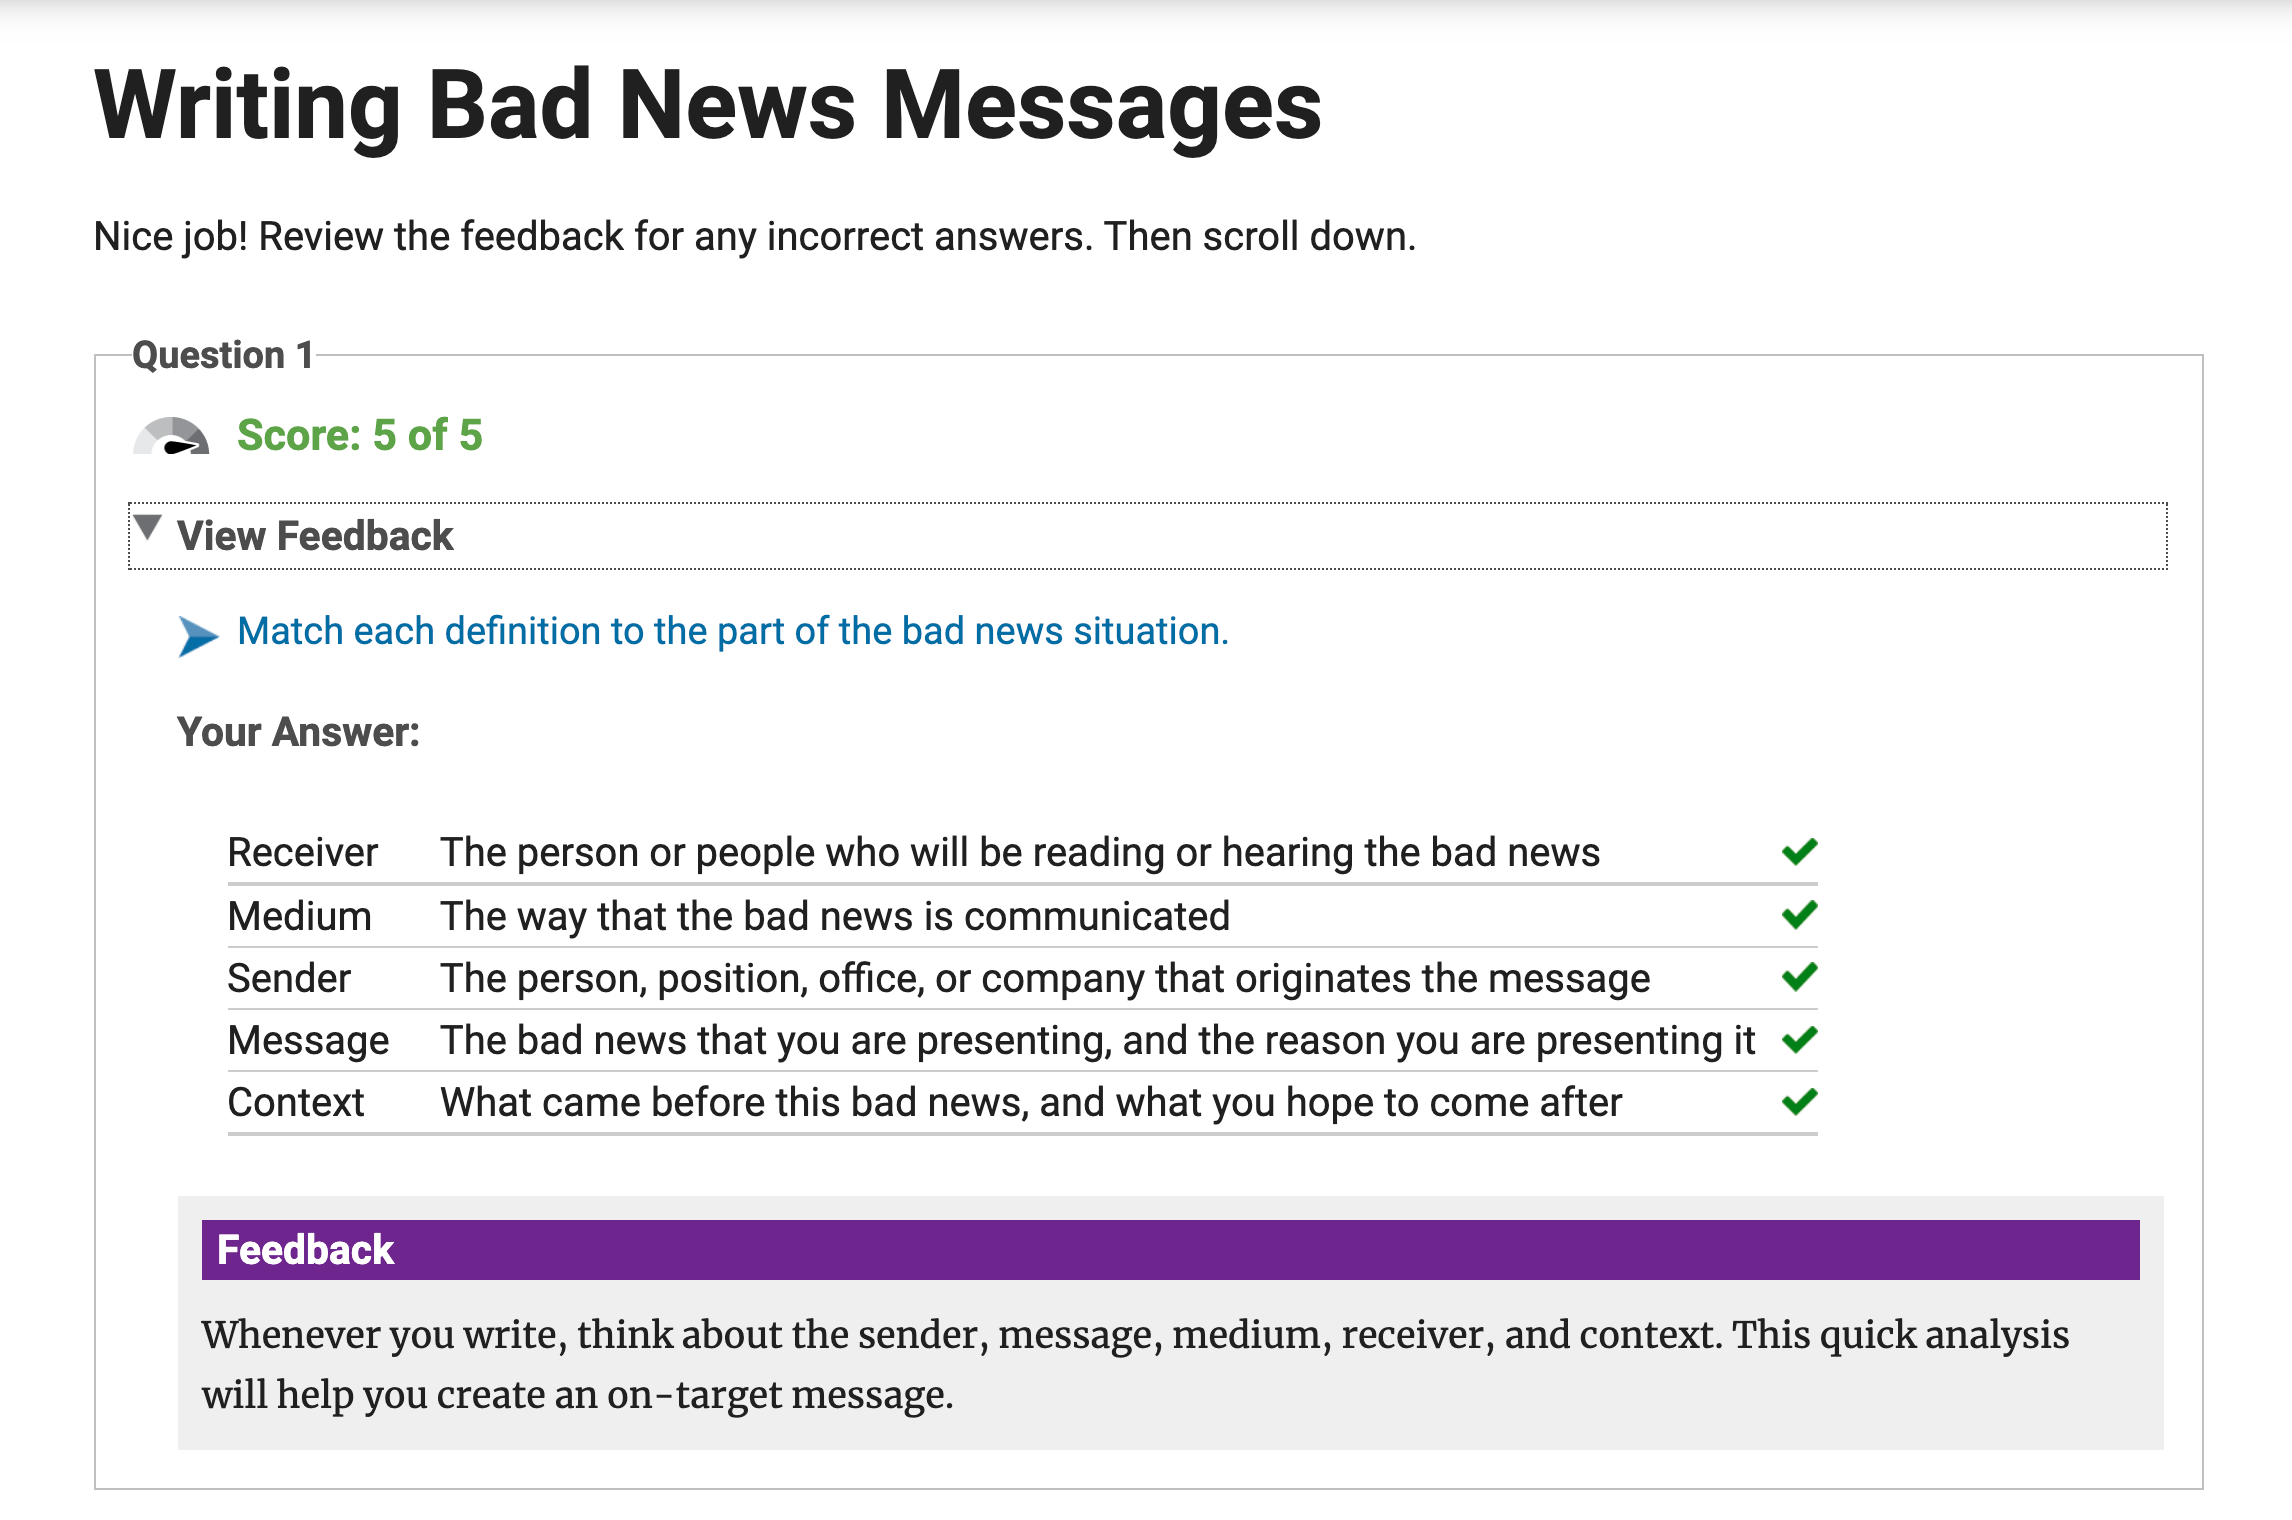 Writing Bad News Messages - Single License